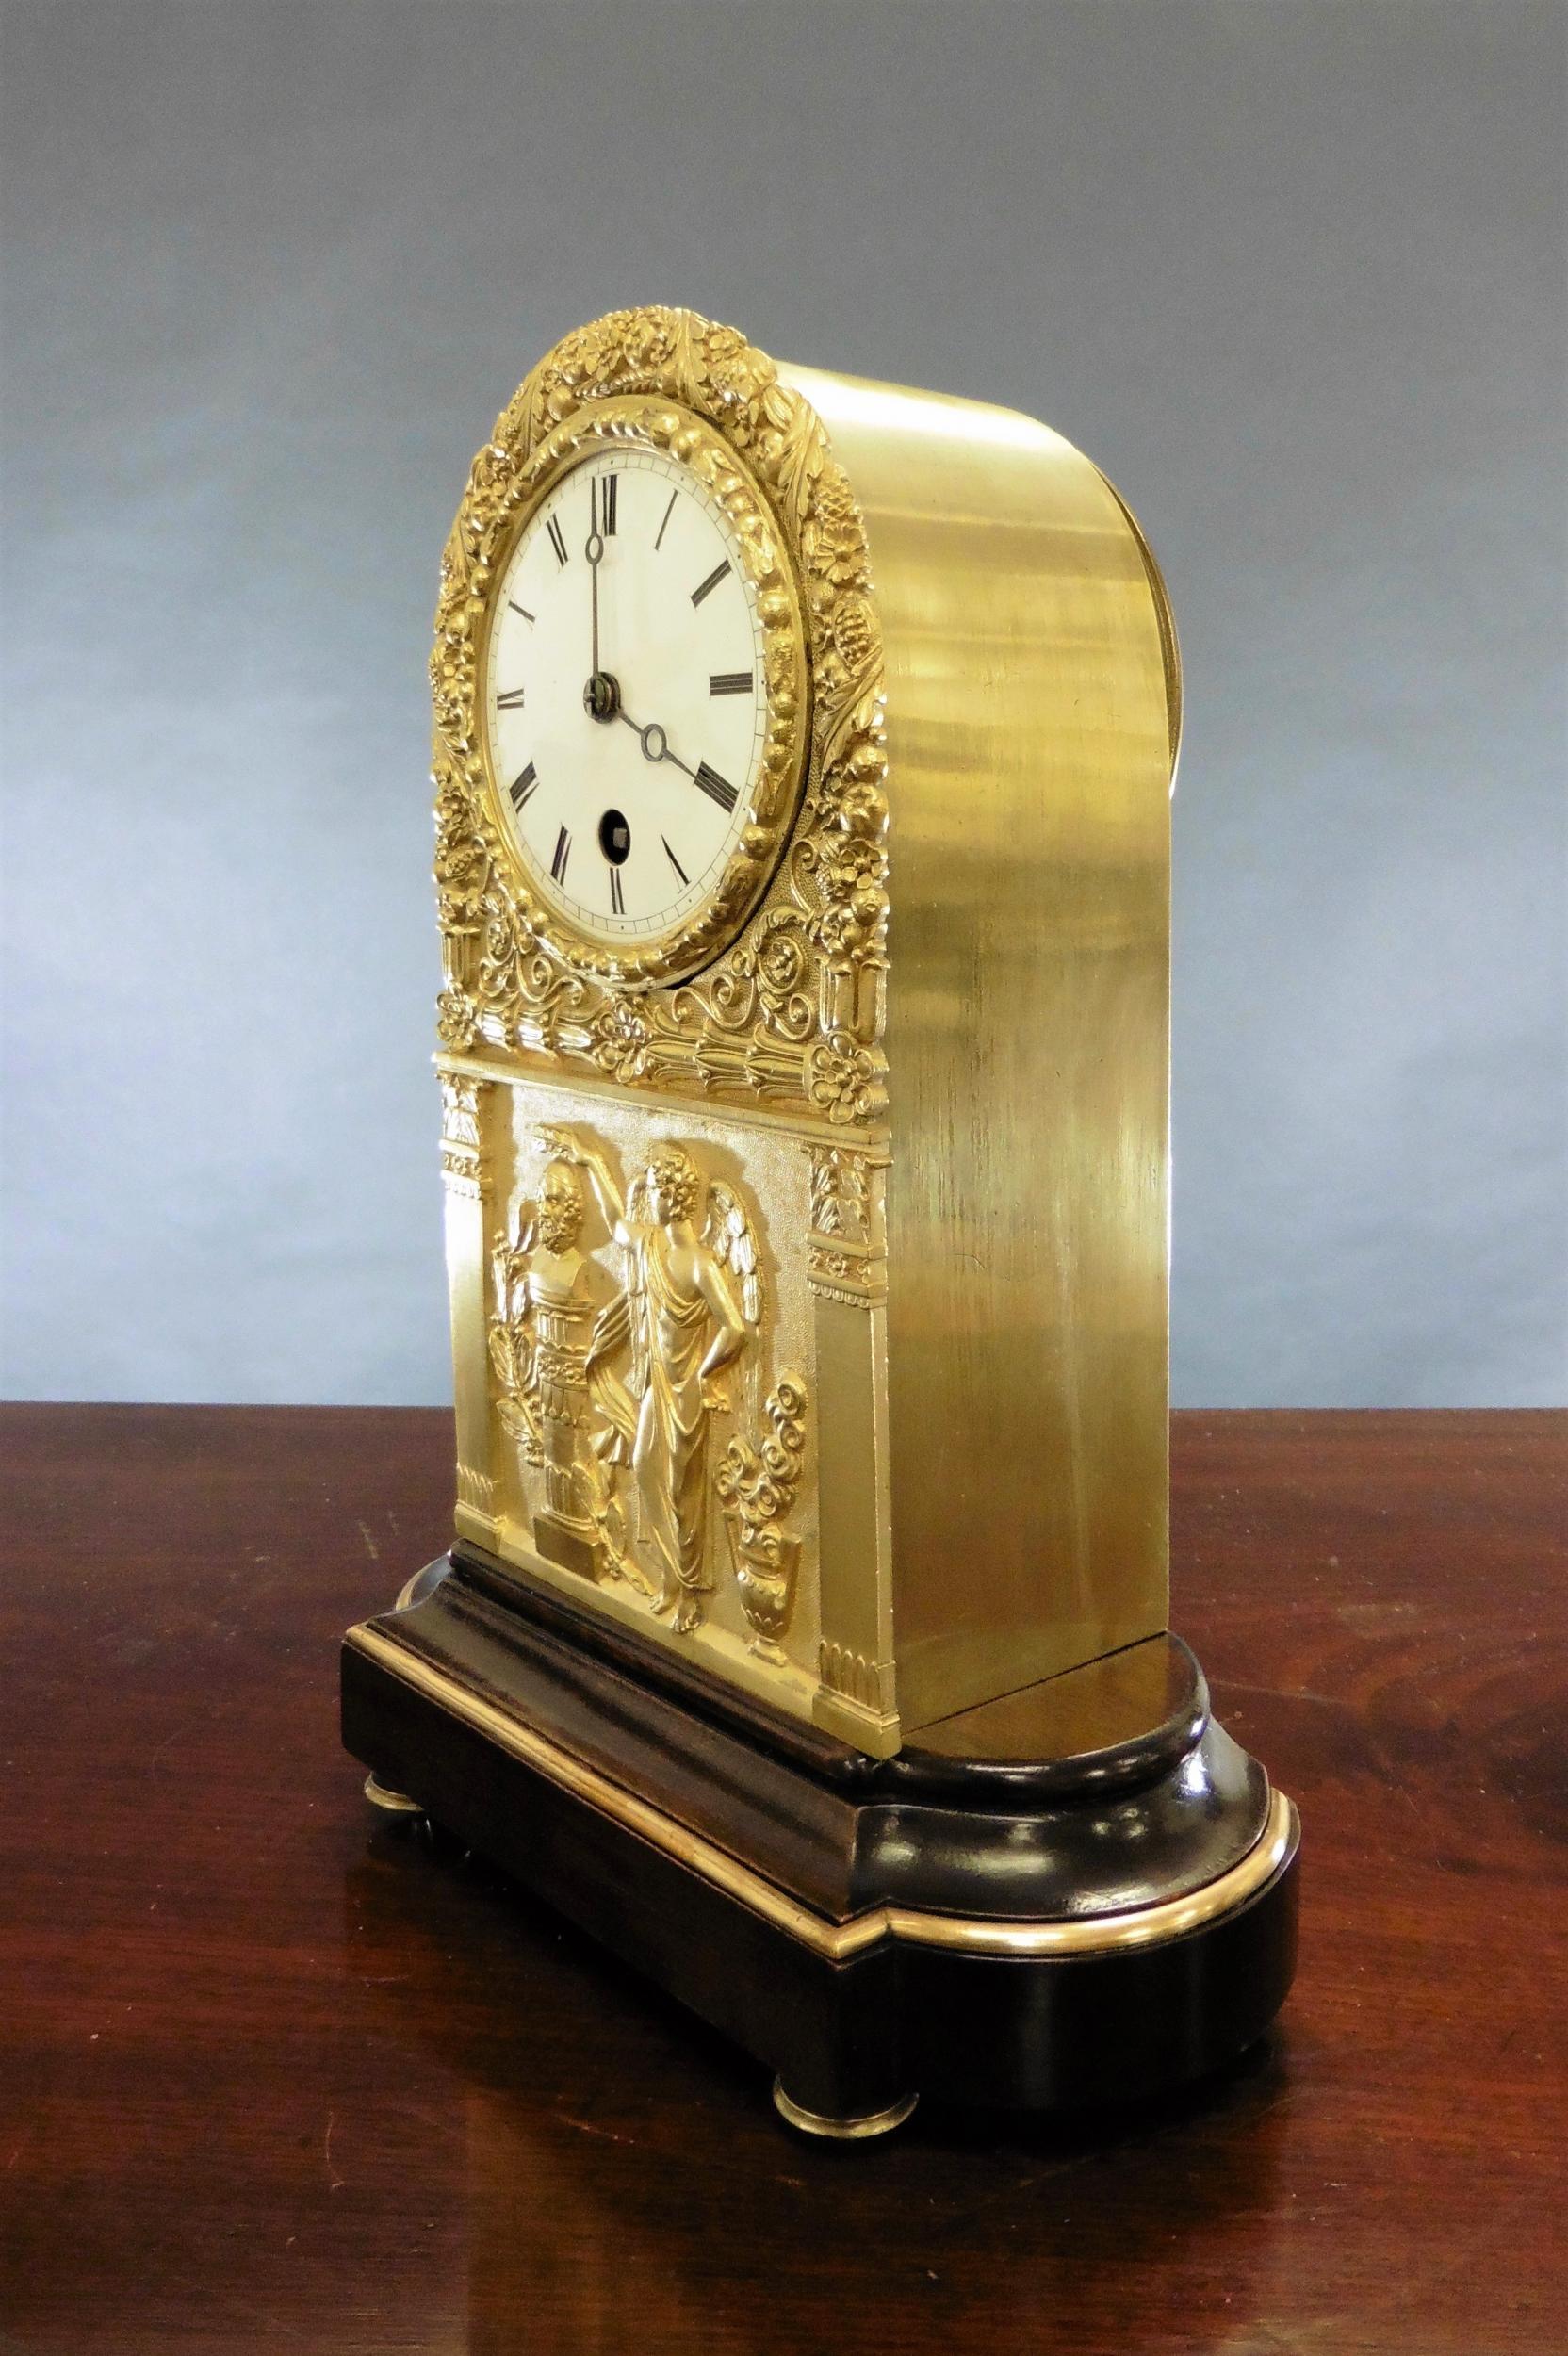 Arch top French mantel clock in a finely decorated Ormolu case with classical scene to the front, standing on a mahogany base with brass banding and resting on brass feet.

Enamel dial with Roman numerals and original ‘blued’ steel ‘Moonpoise’